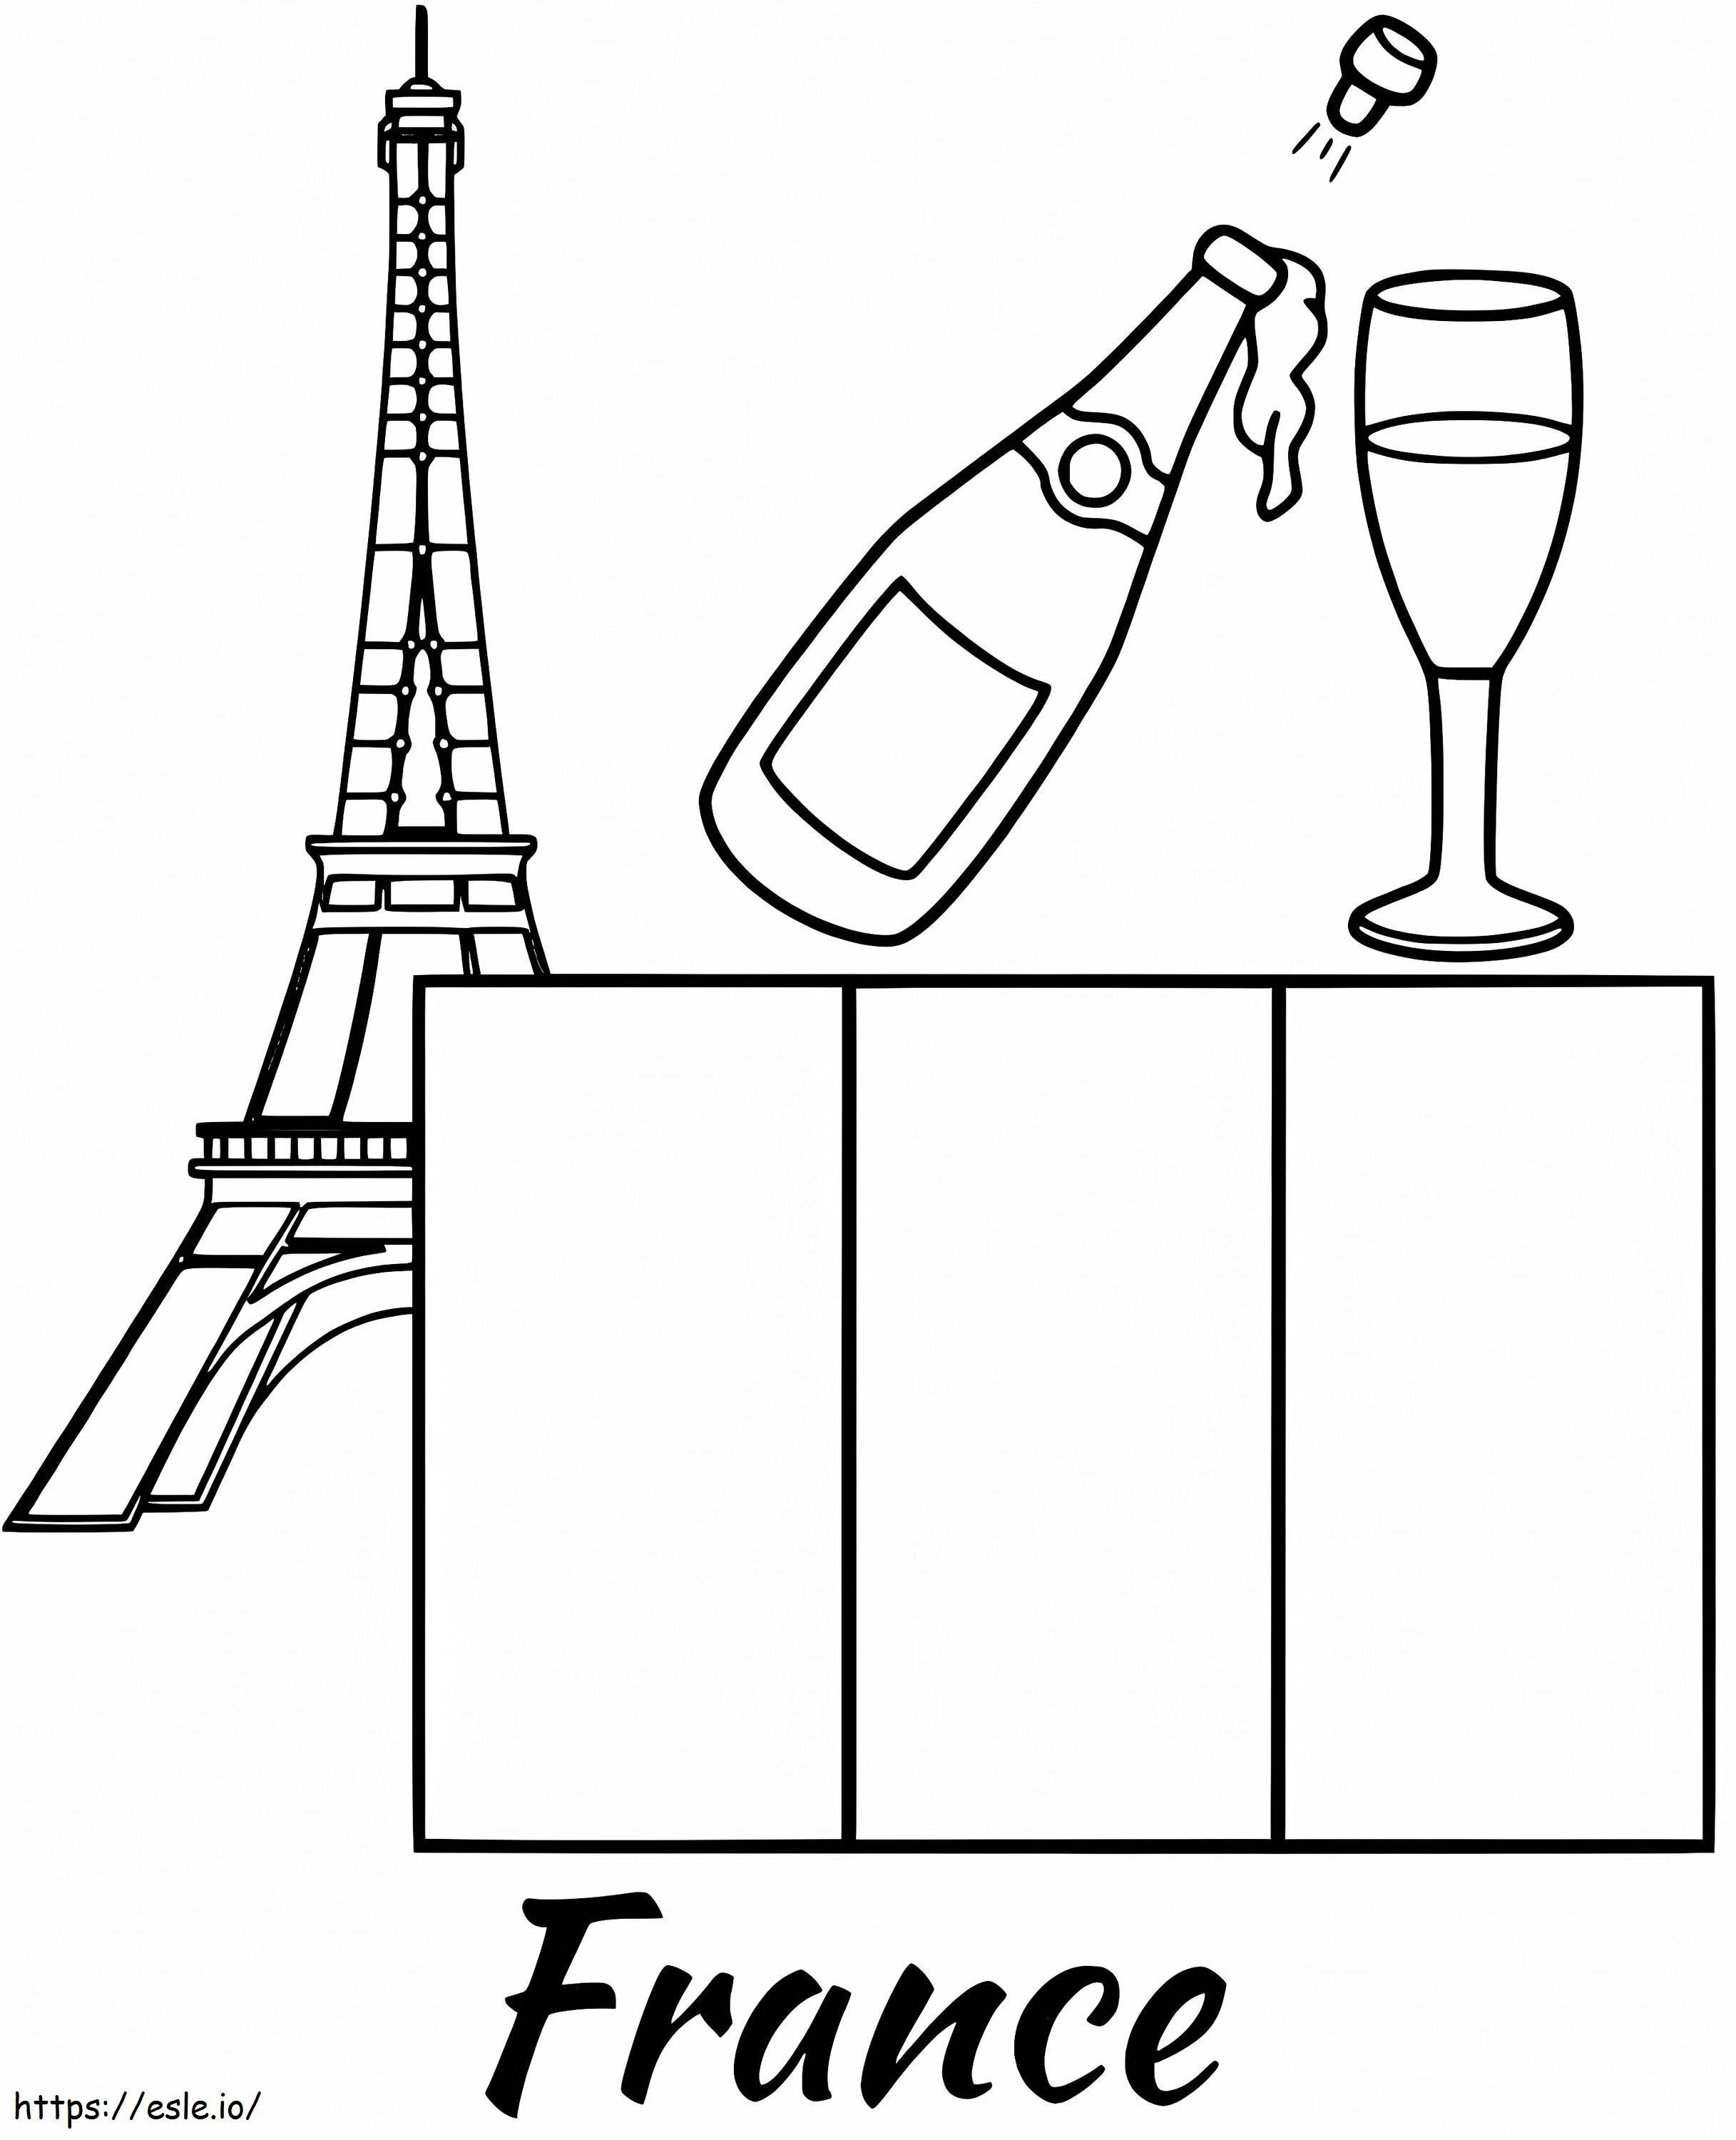 France Flag coloring page